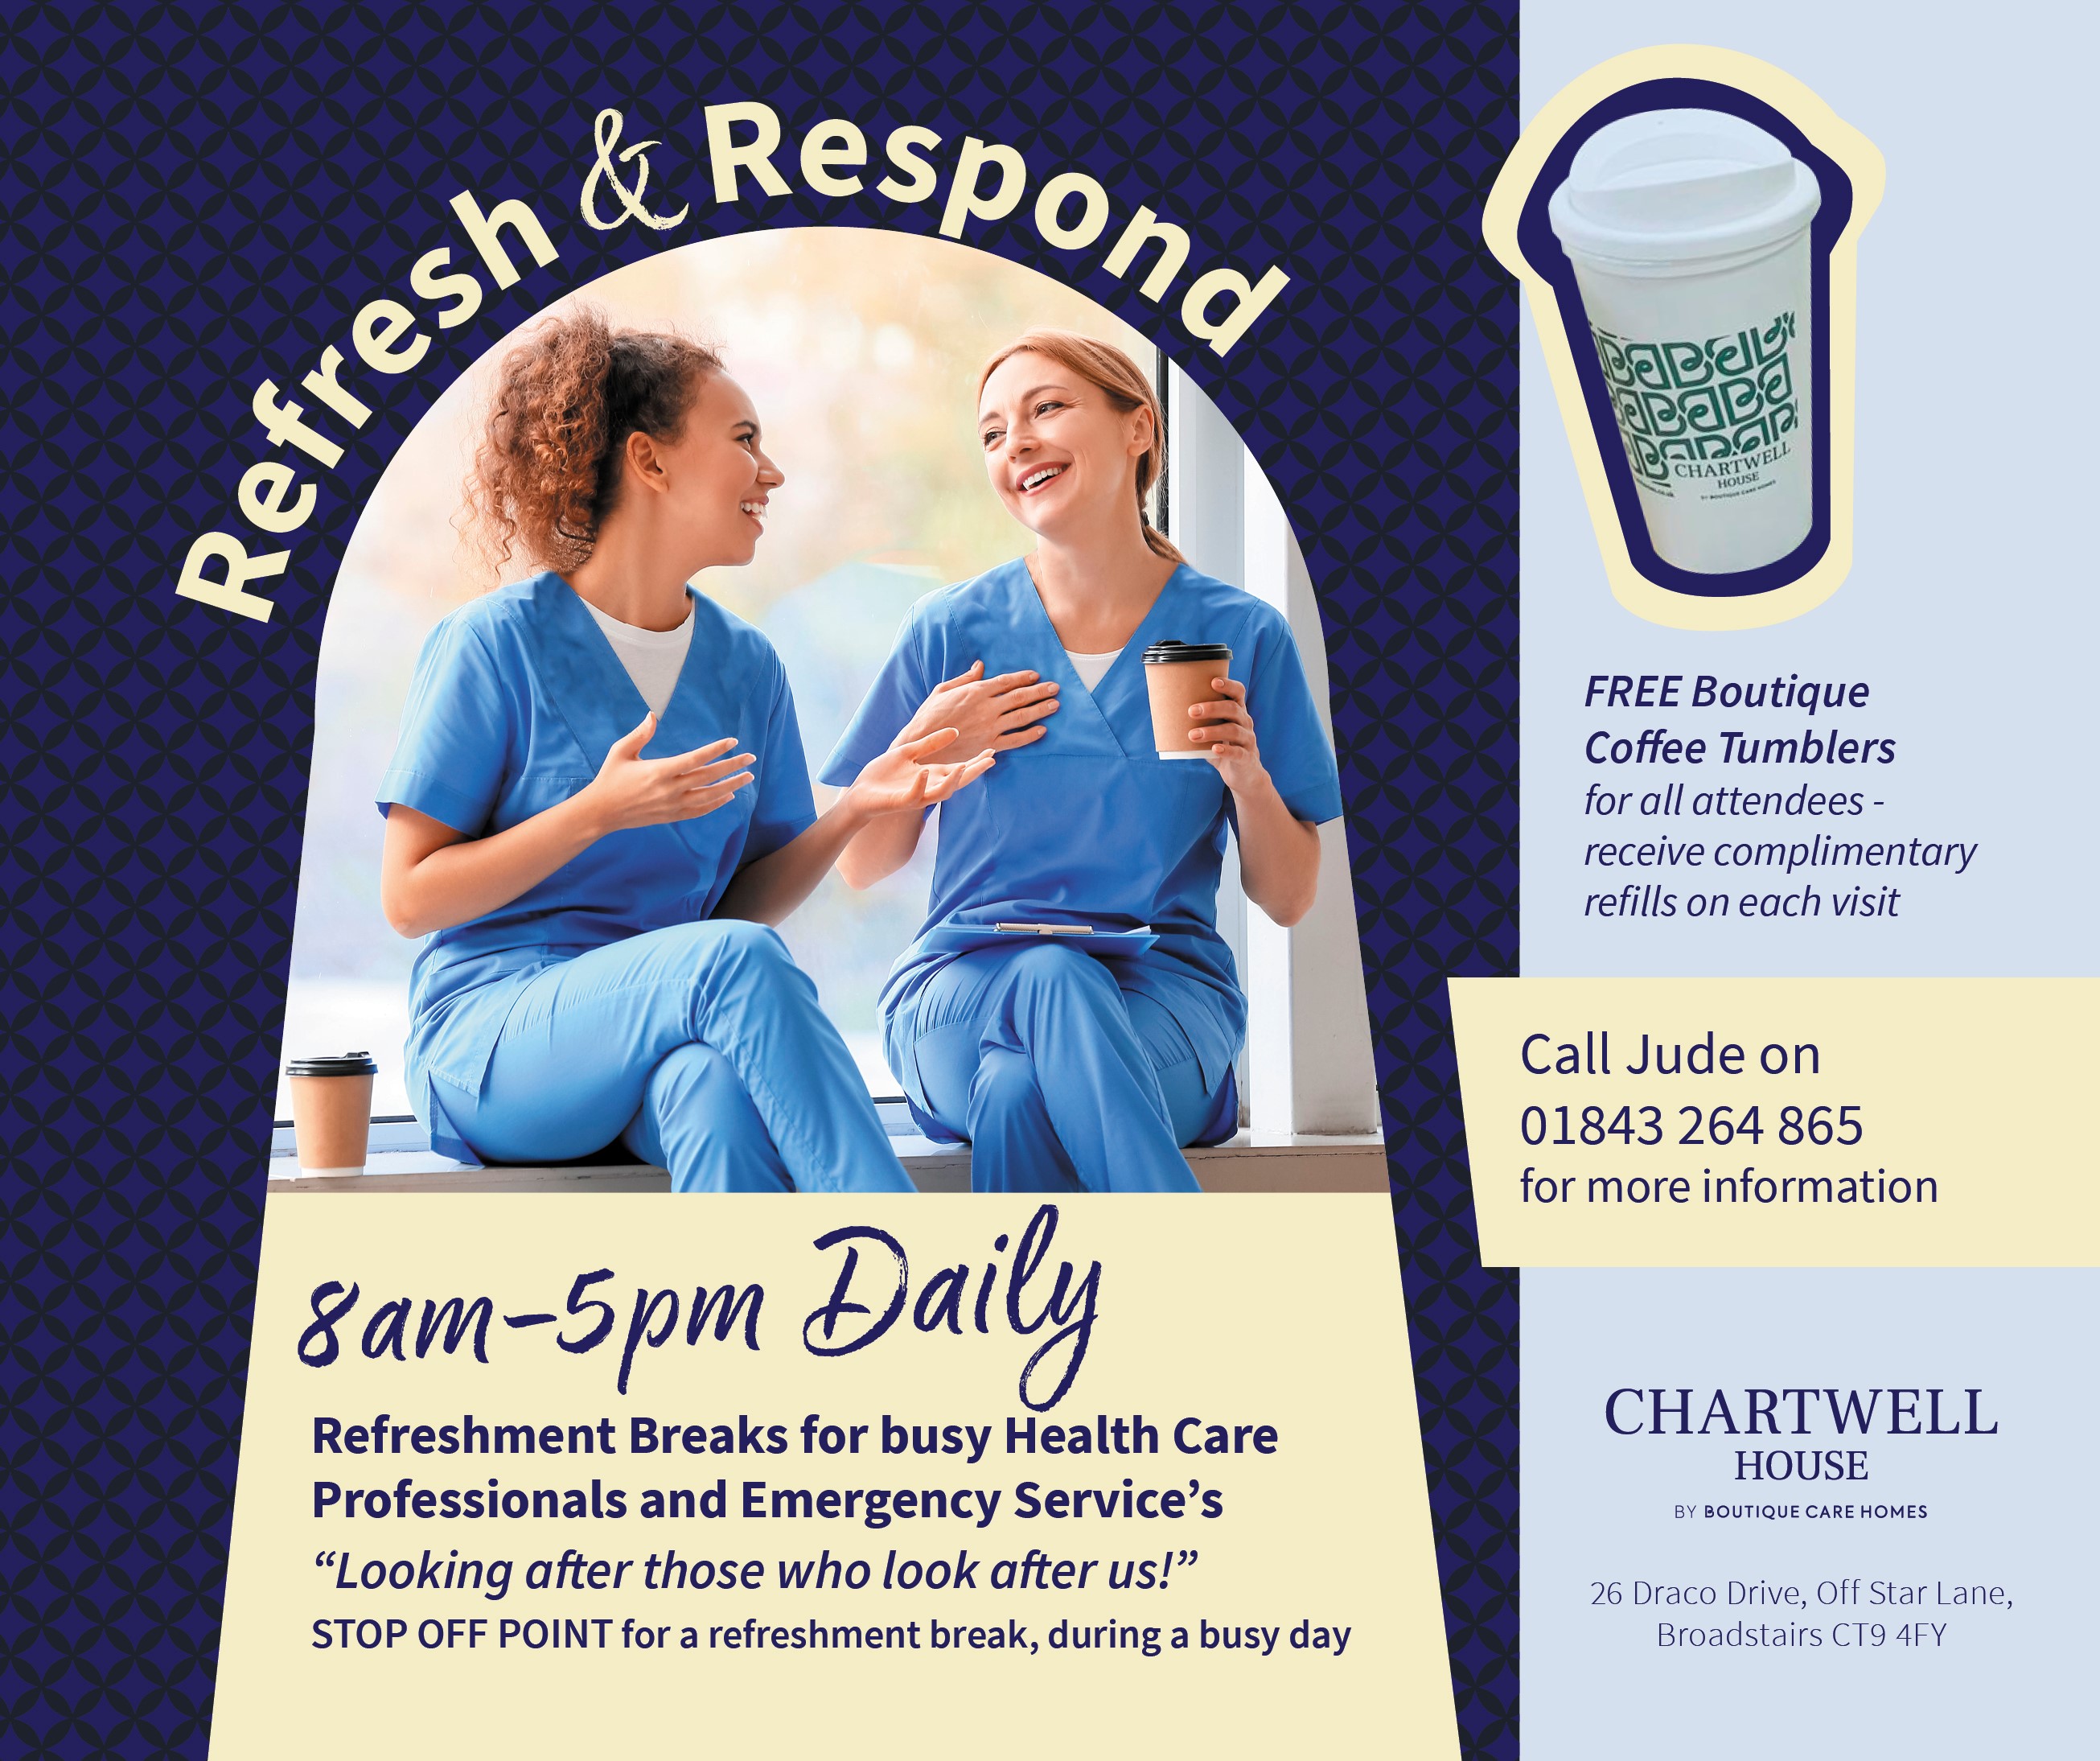 Refresh and Respond Launched at Chartwell House